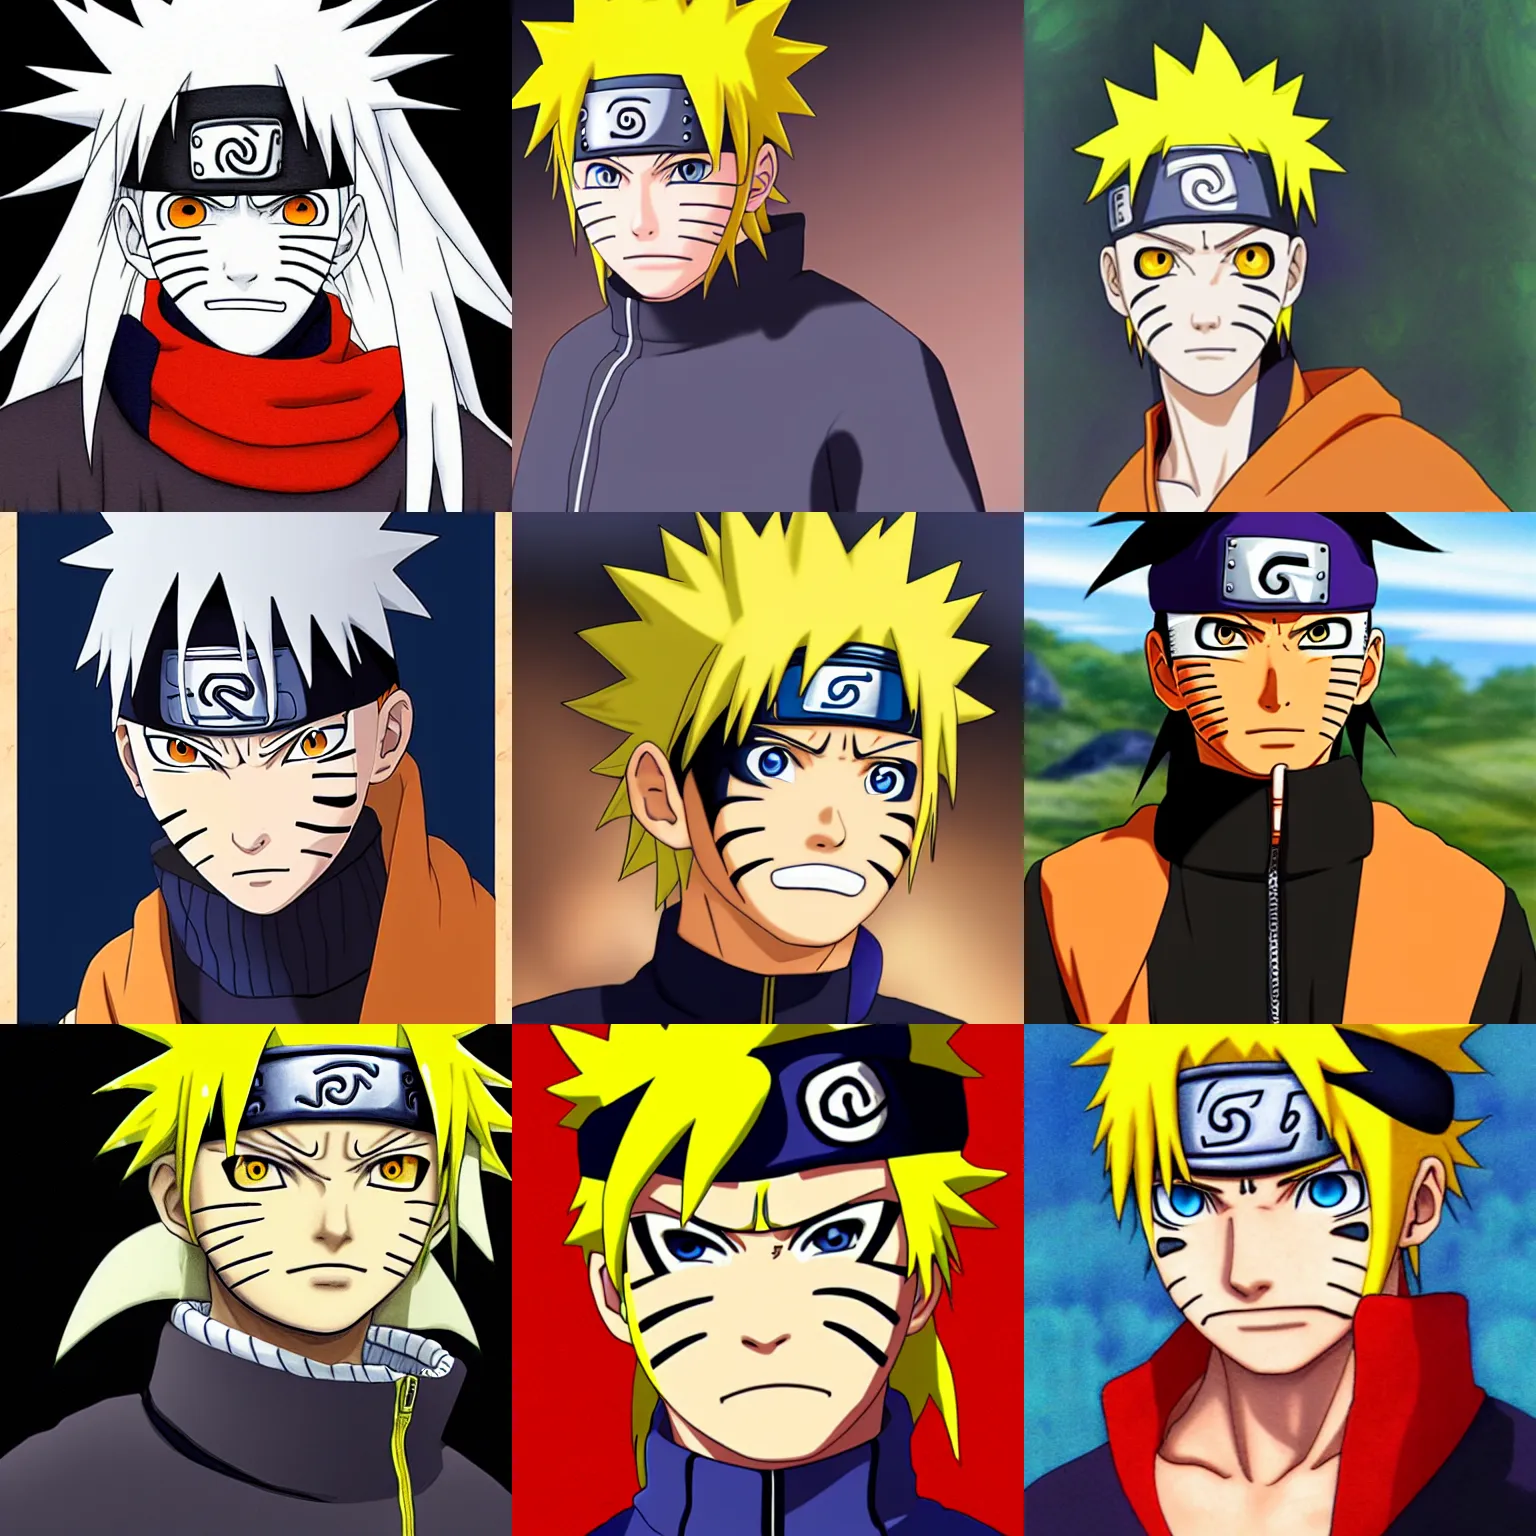 Prompt: portrait of character naruto from series naruto